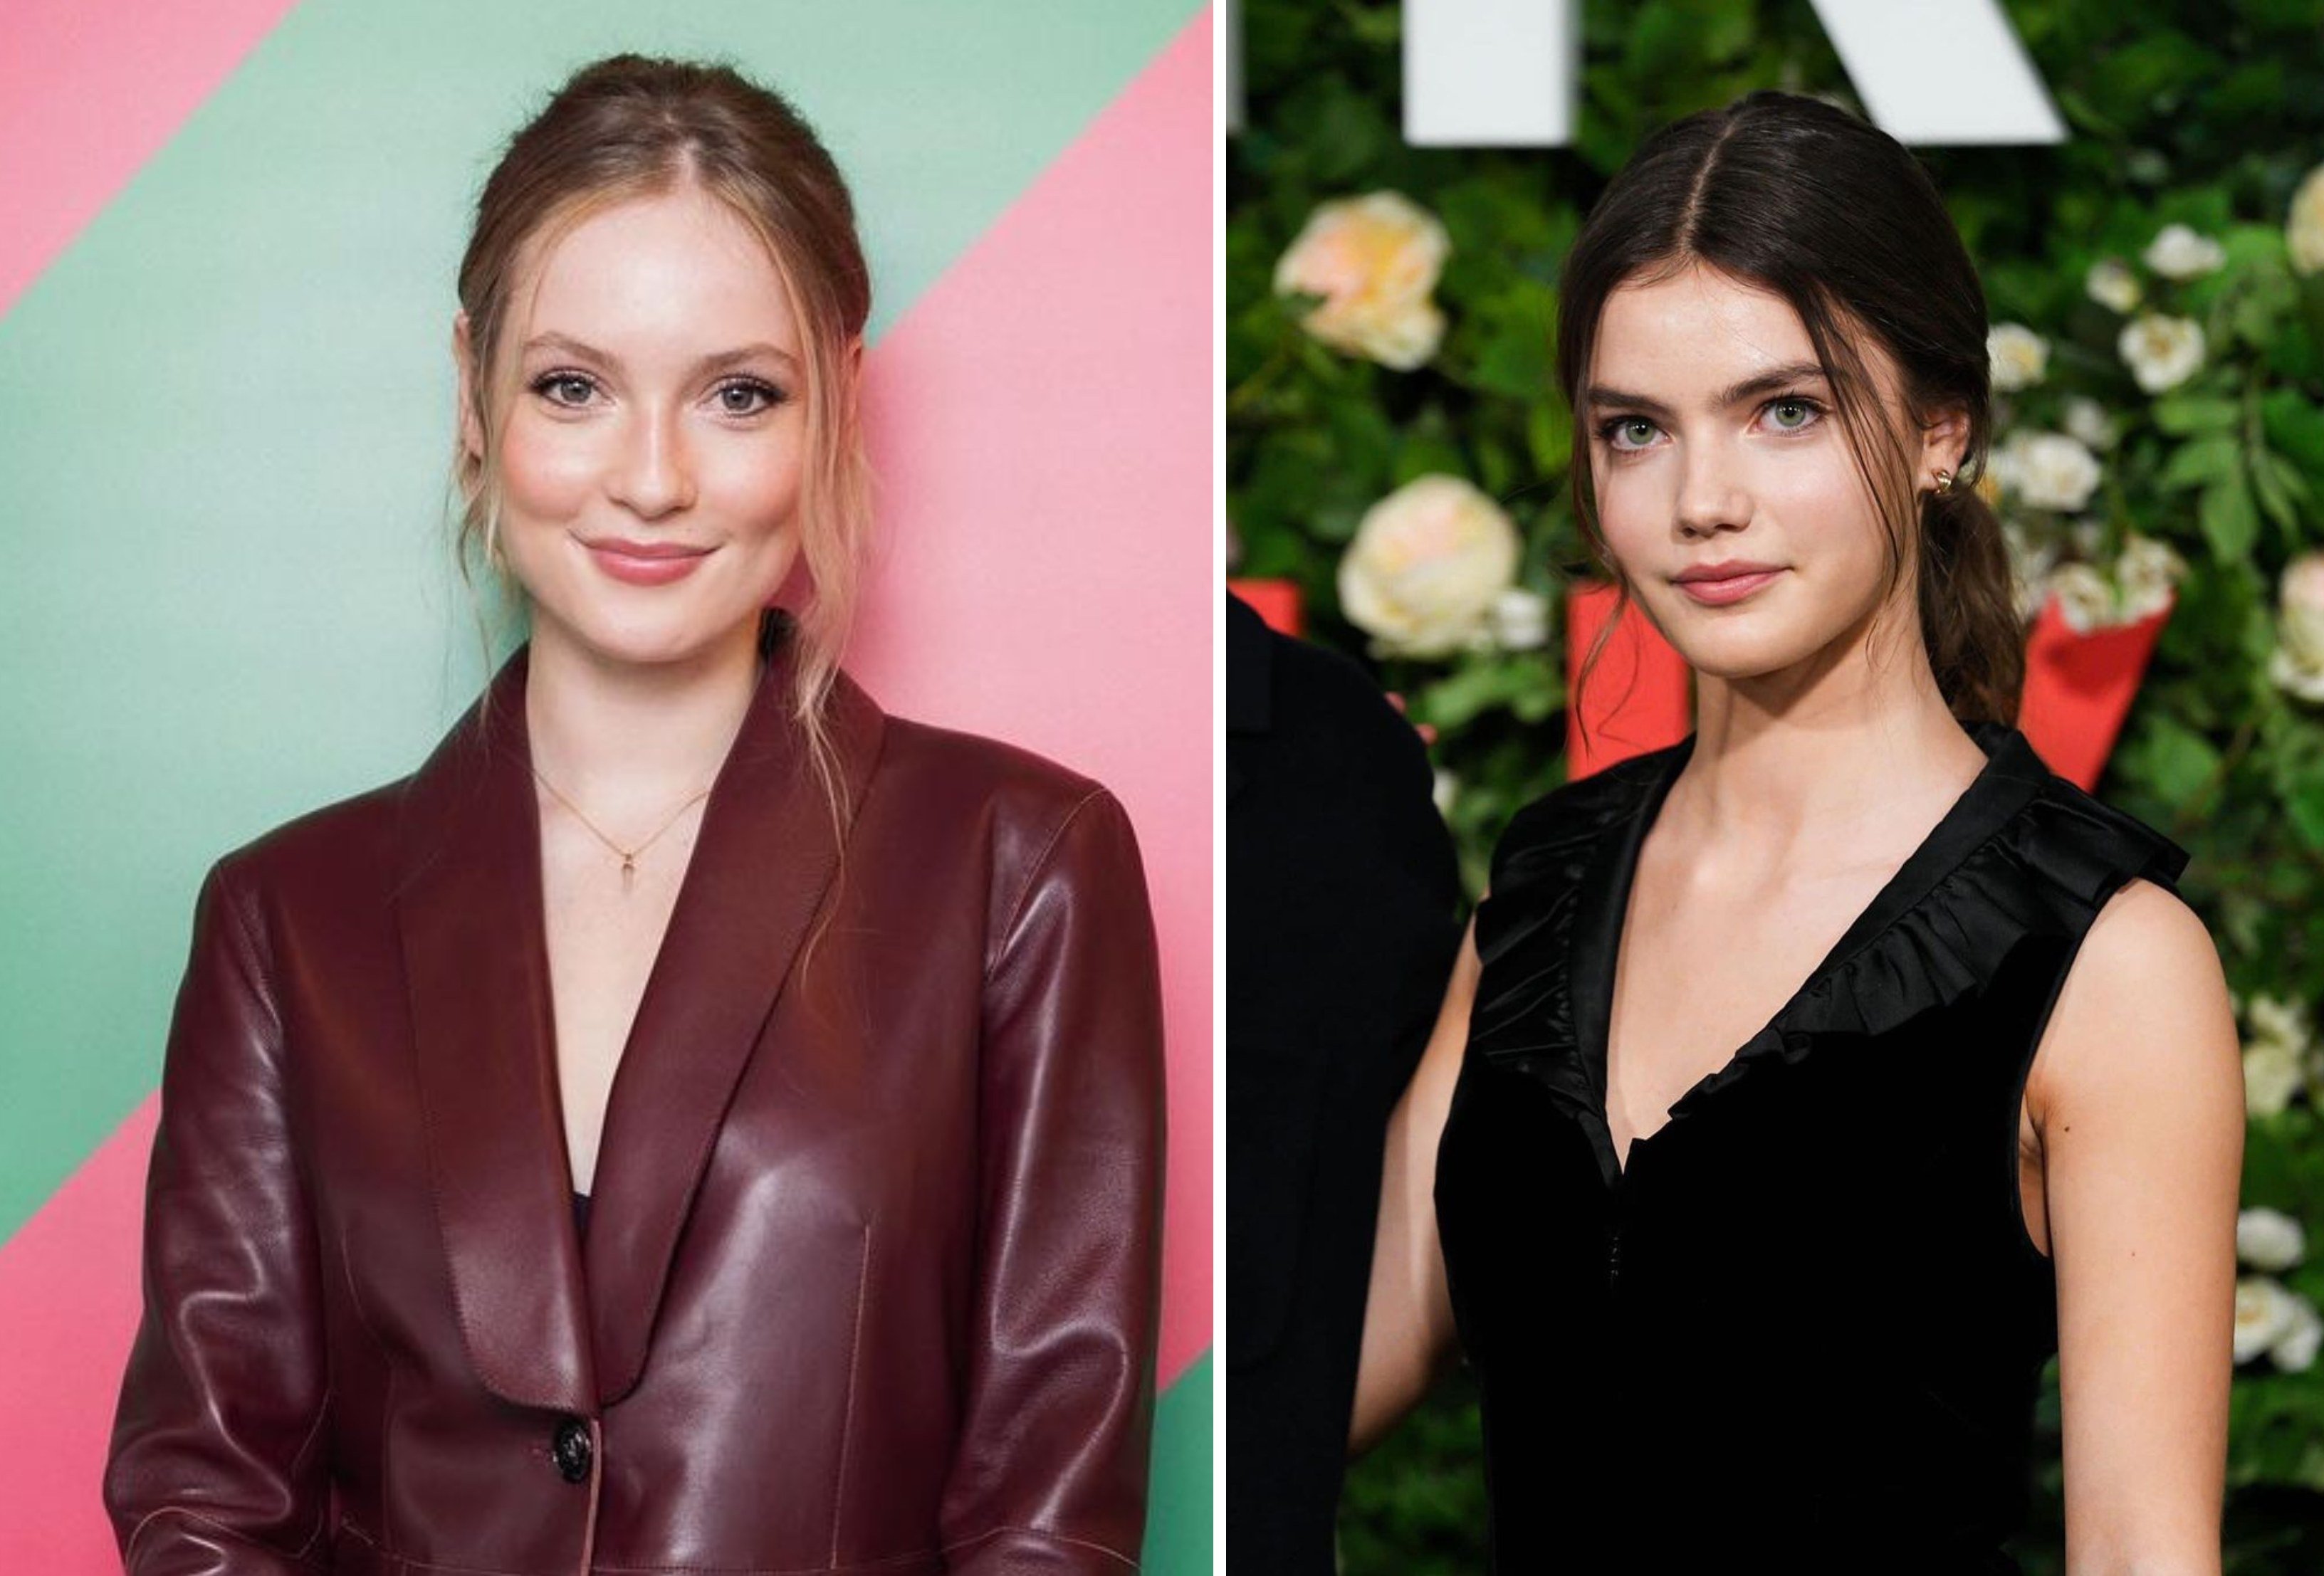 Hannah Dodd (left) and Florence Hunt, two young actresses making waves on Netflix series Bridgerton. Photos: @hannahfkdodd, @florencehunt_/Instagram
